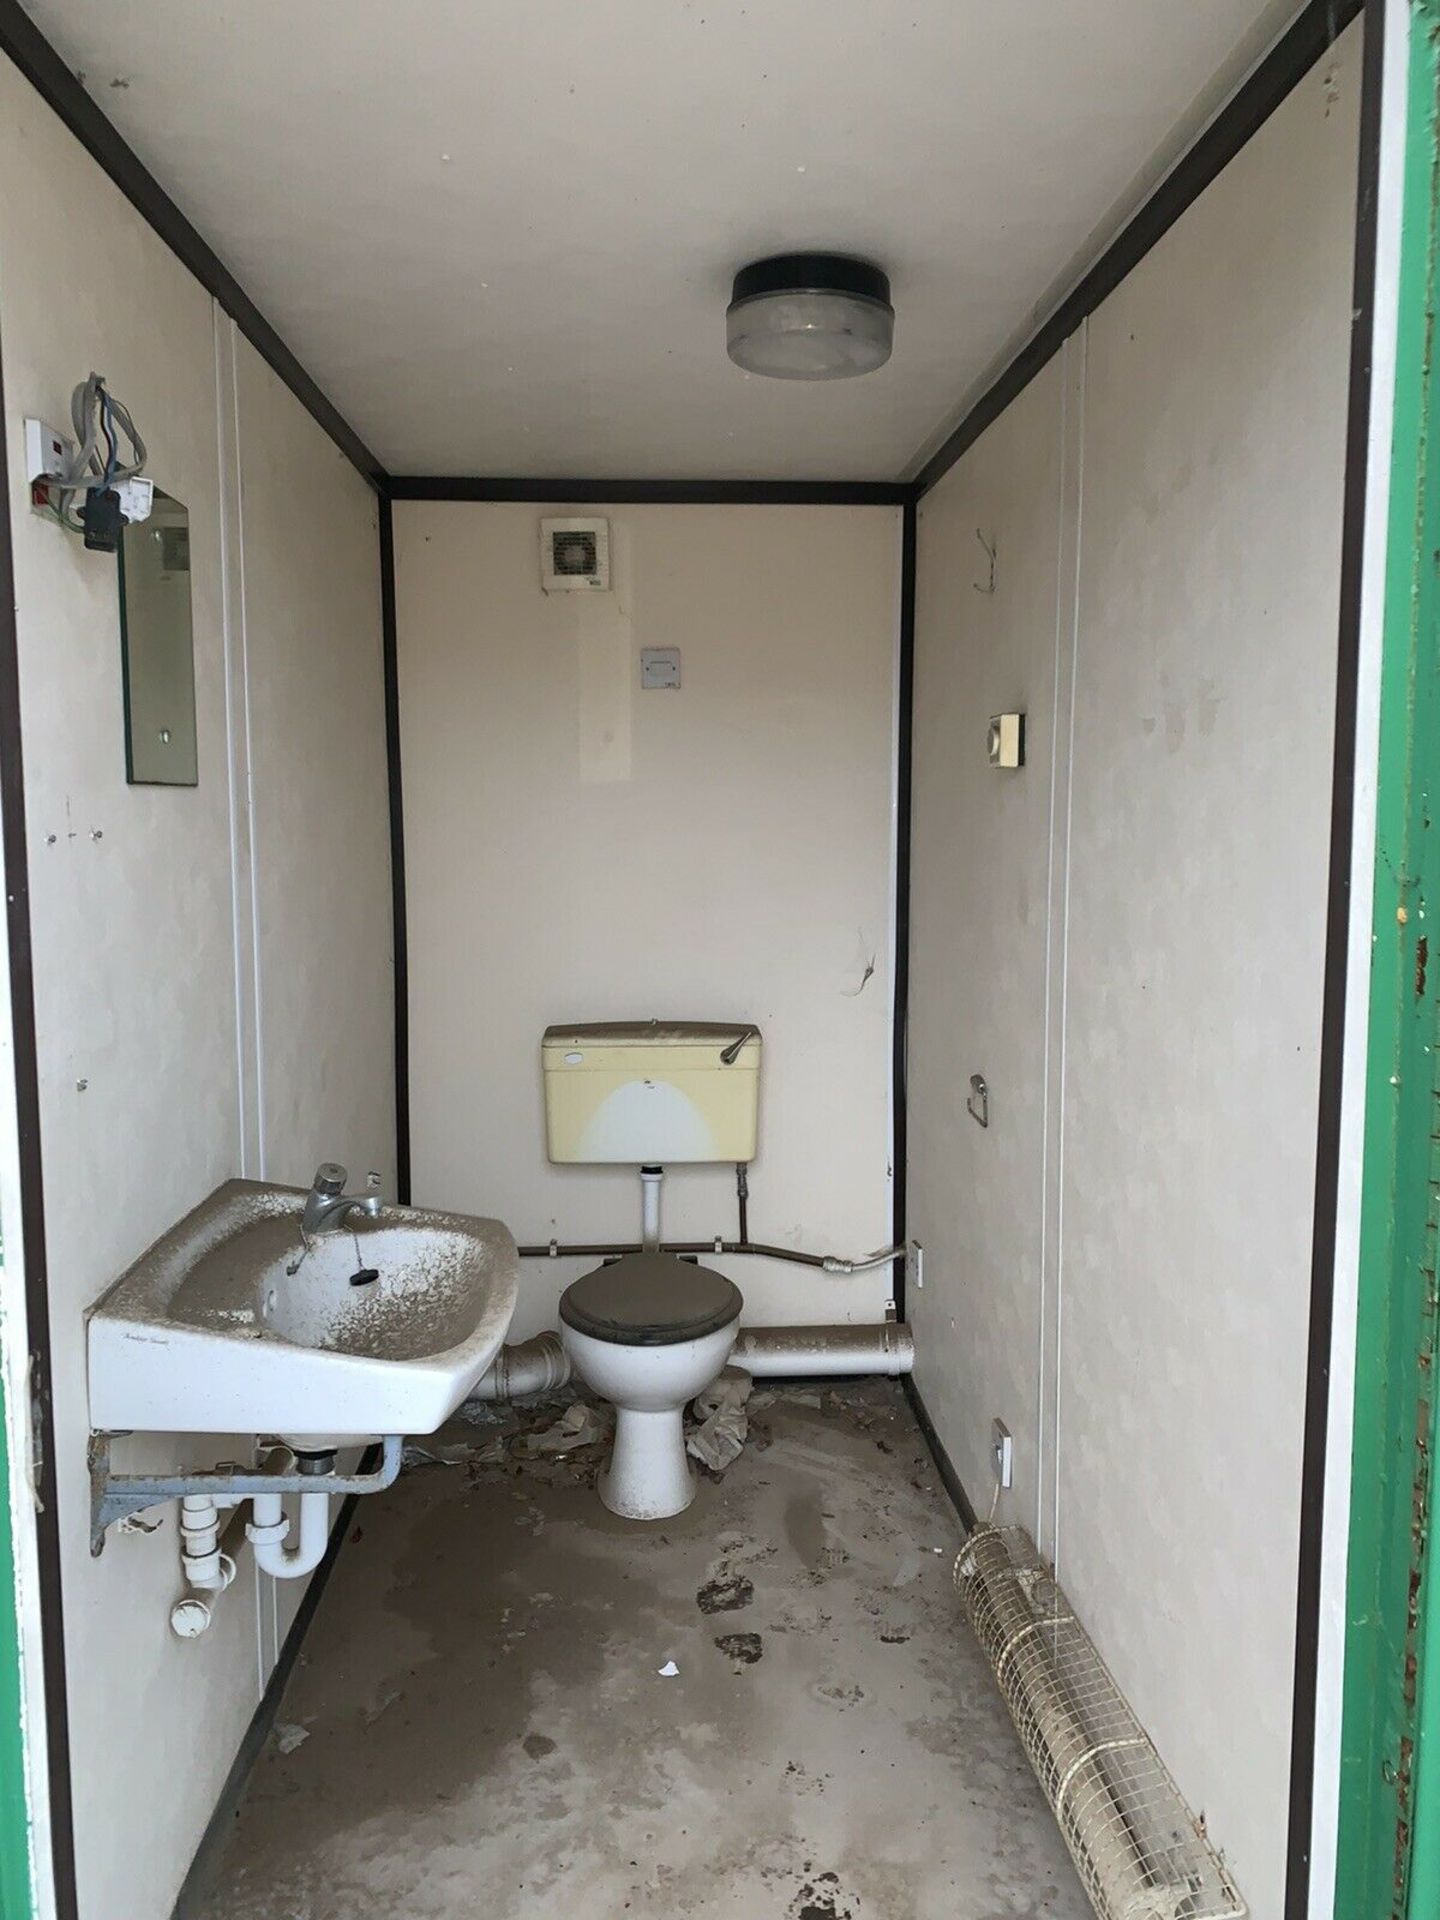 Portable Toilet Block With Shower - Image 10 of 10